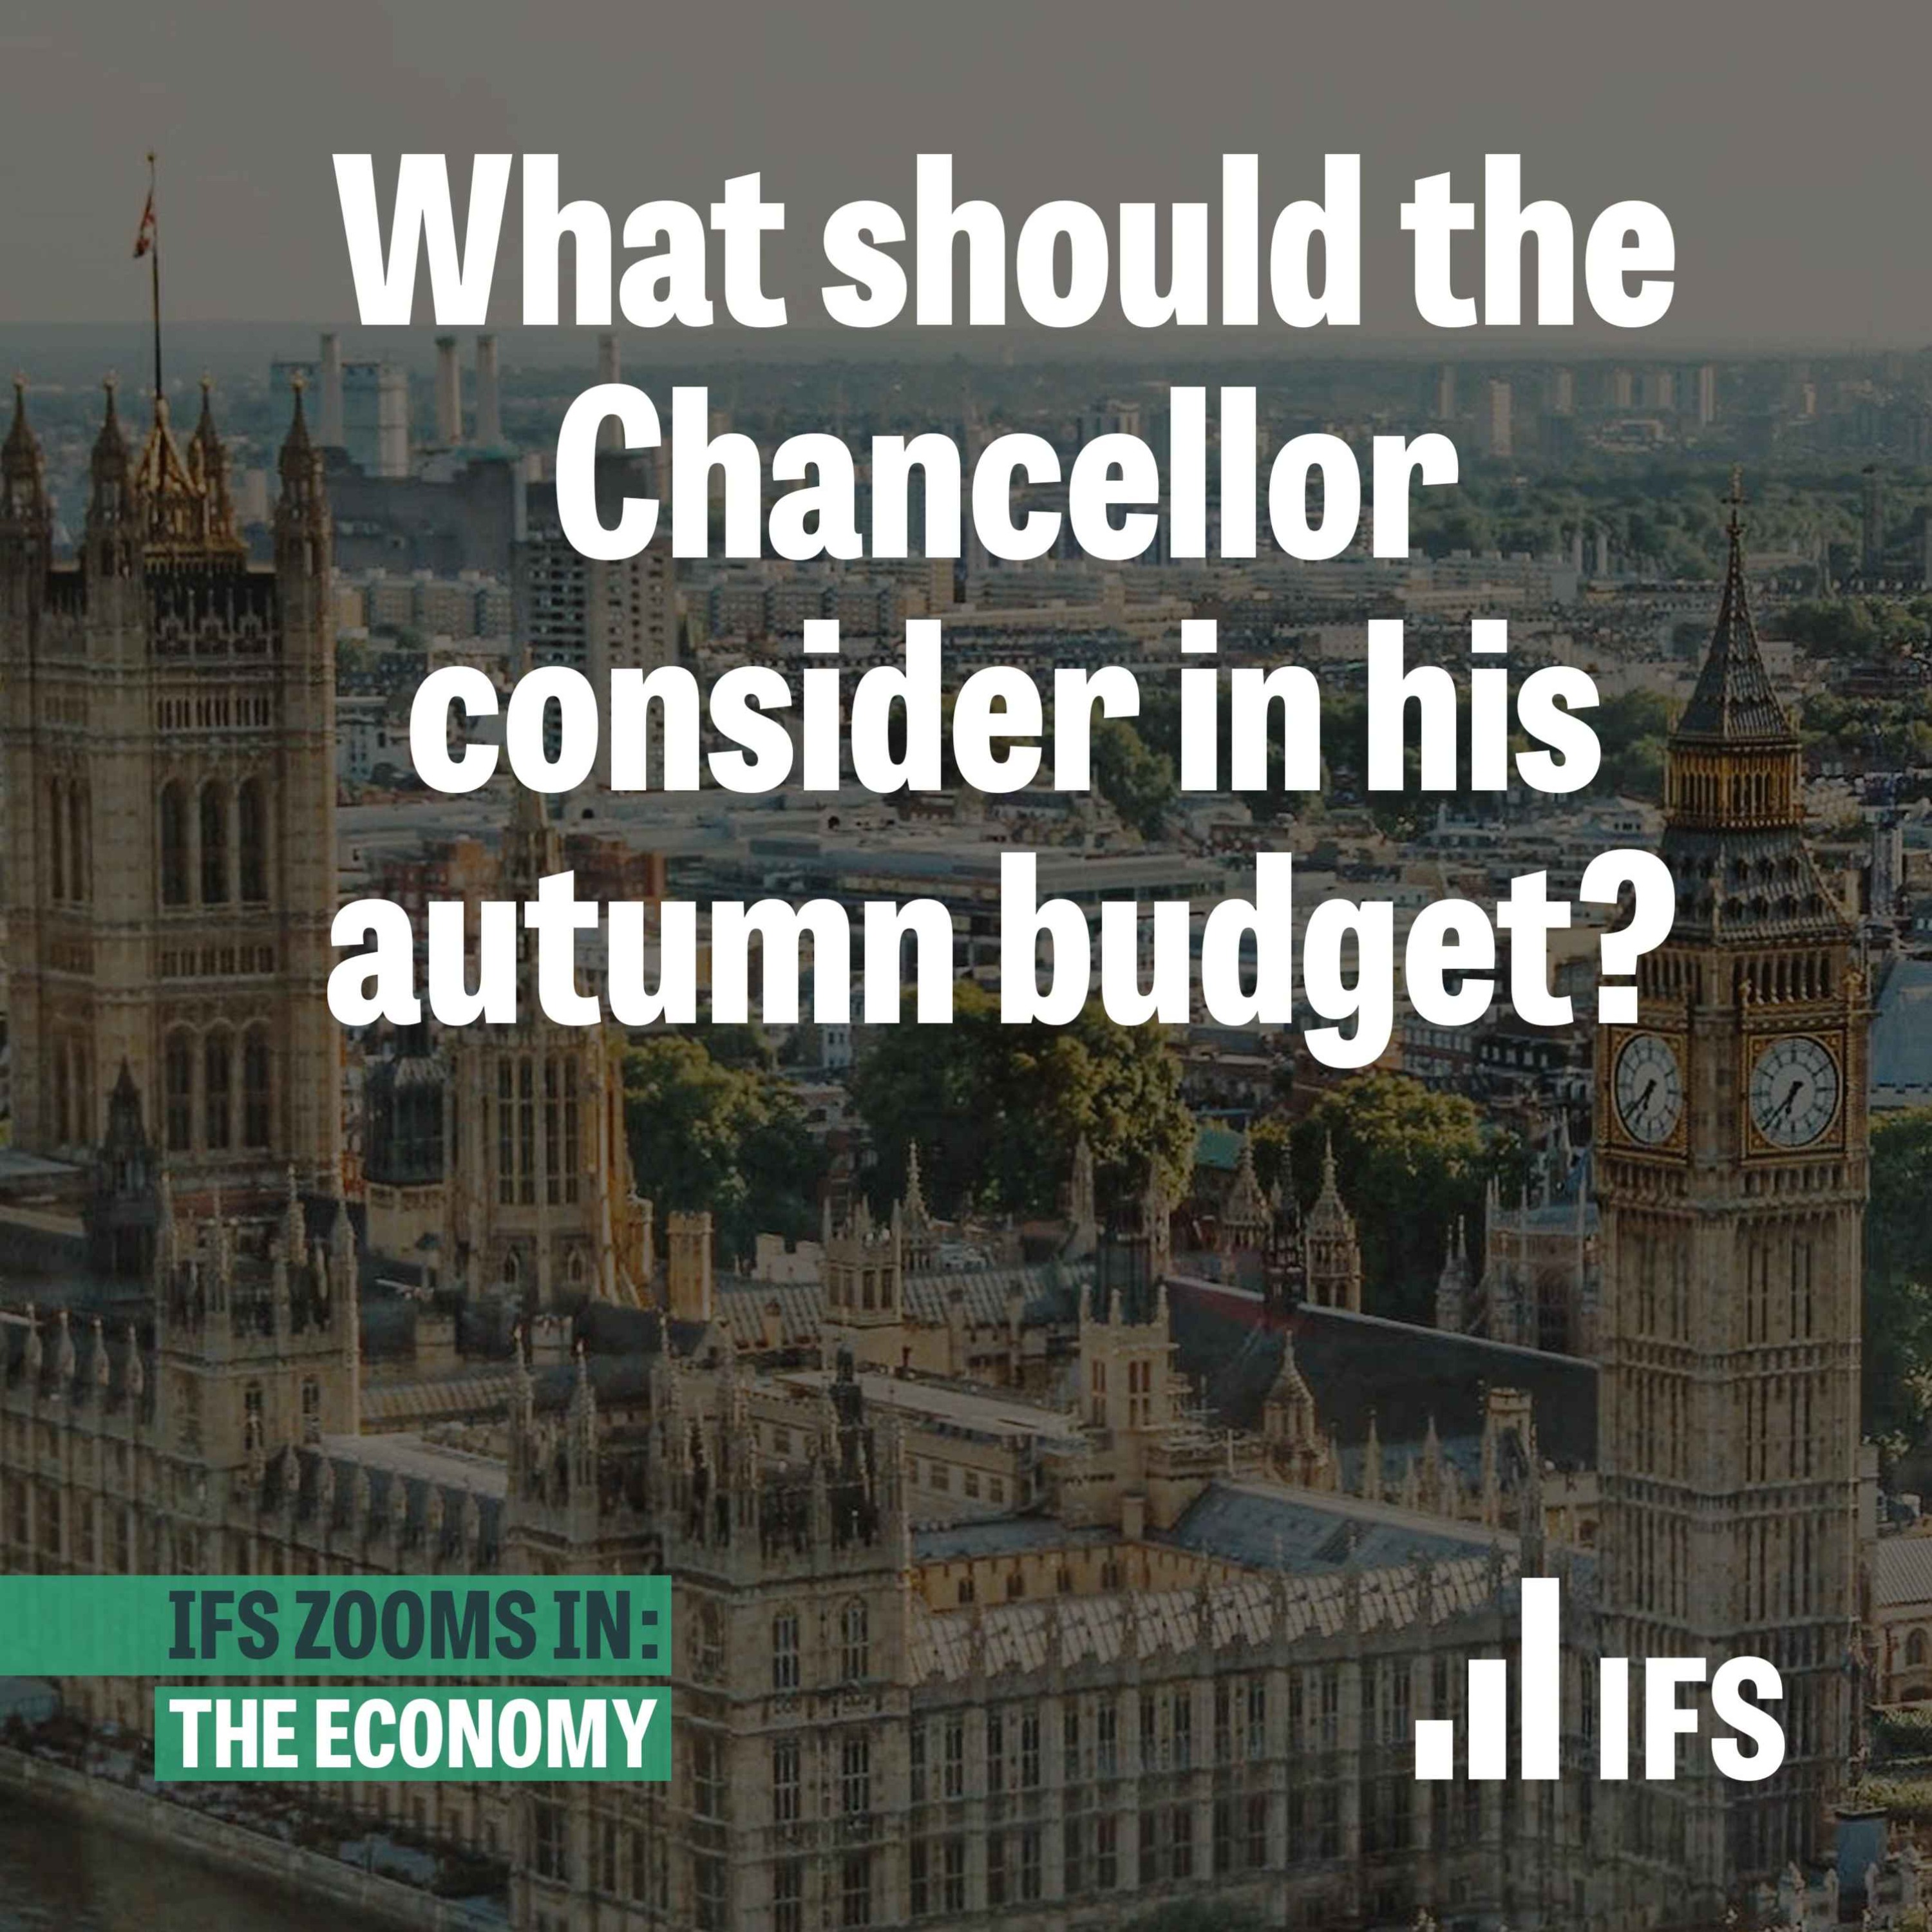 SPECIAL: What should the Chancellor consider in his autumn budget?